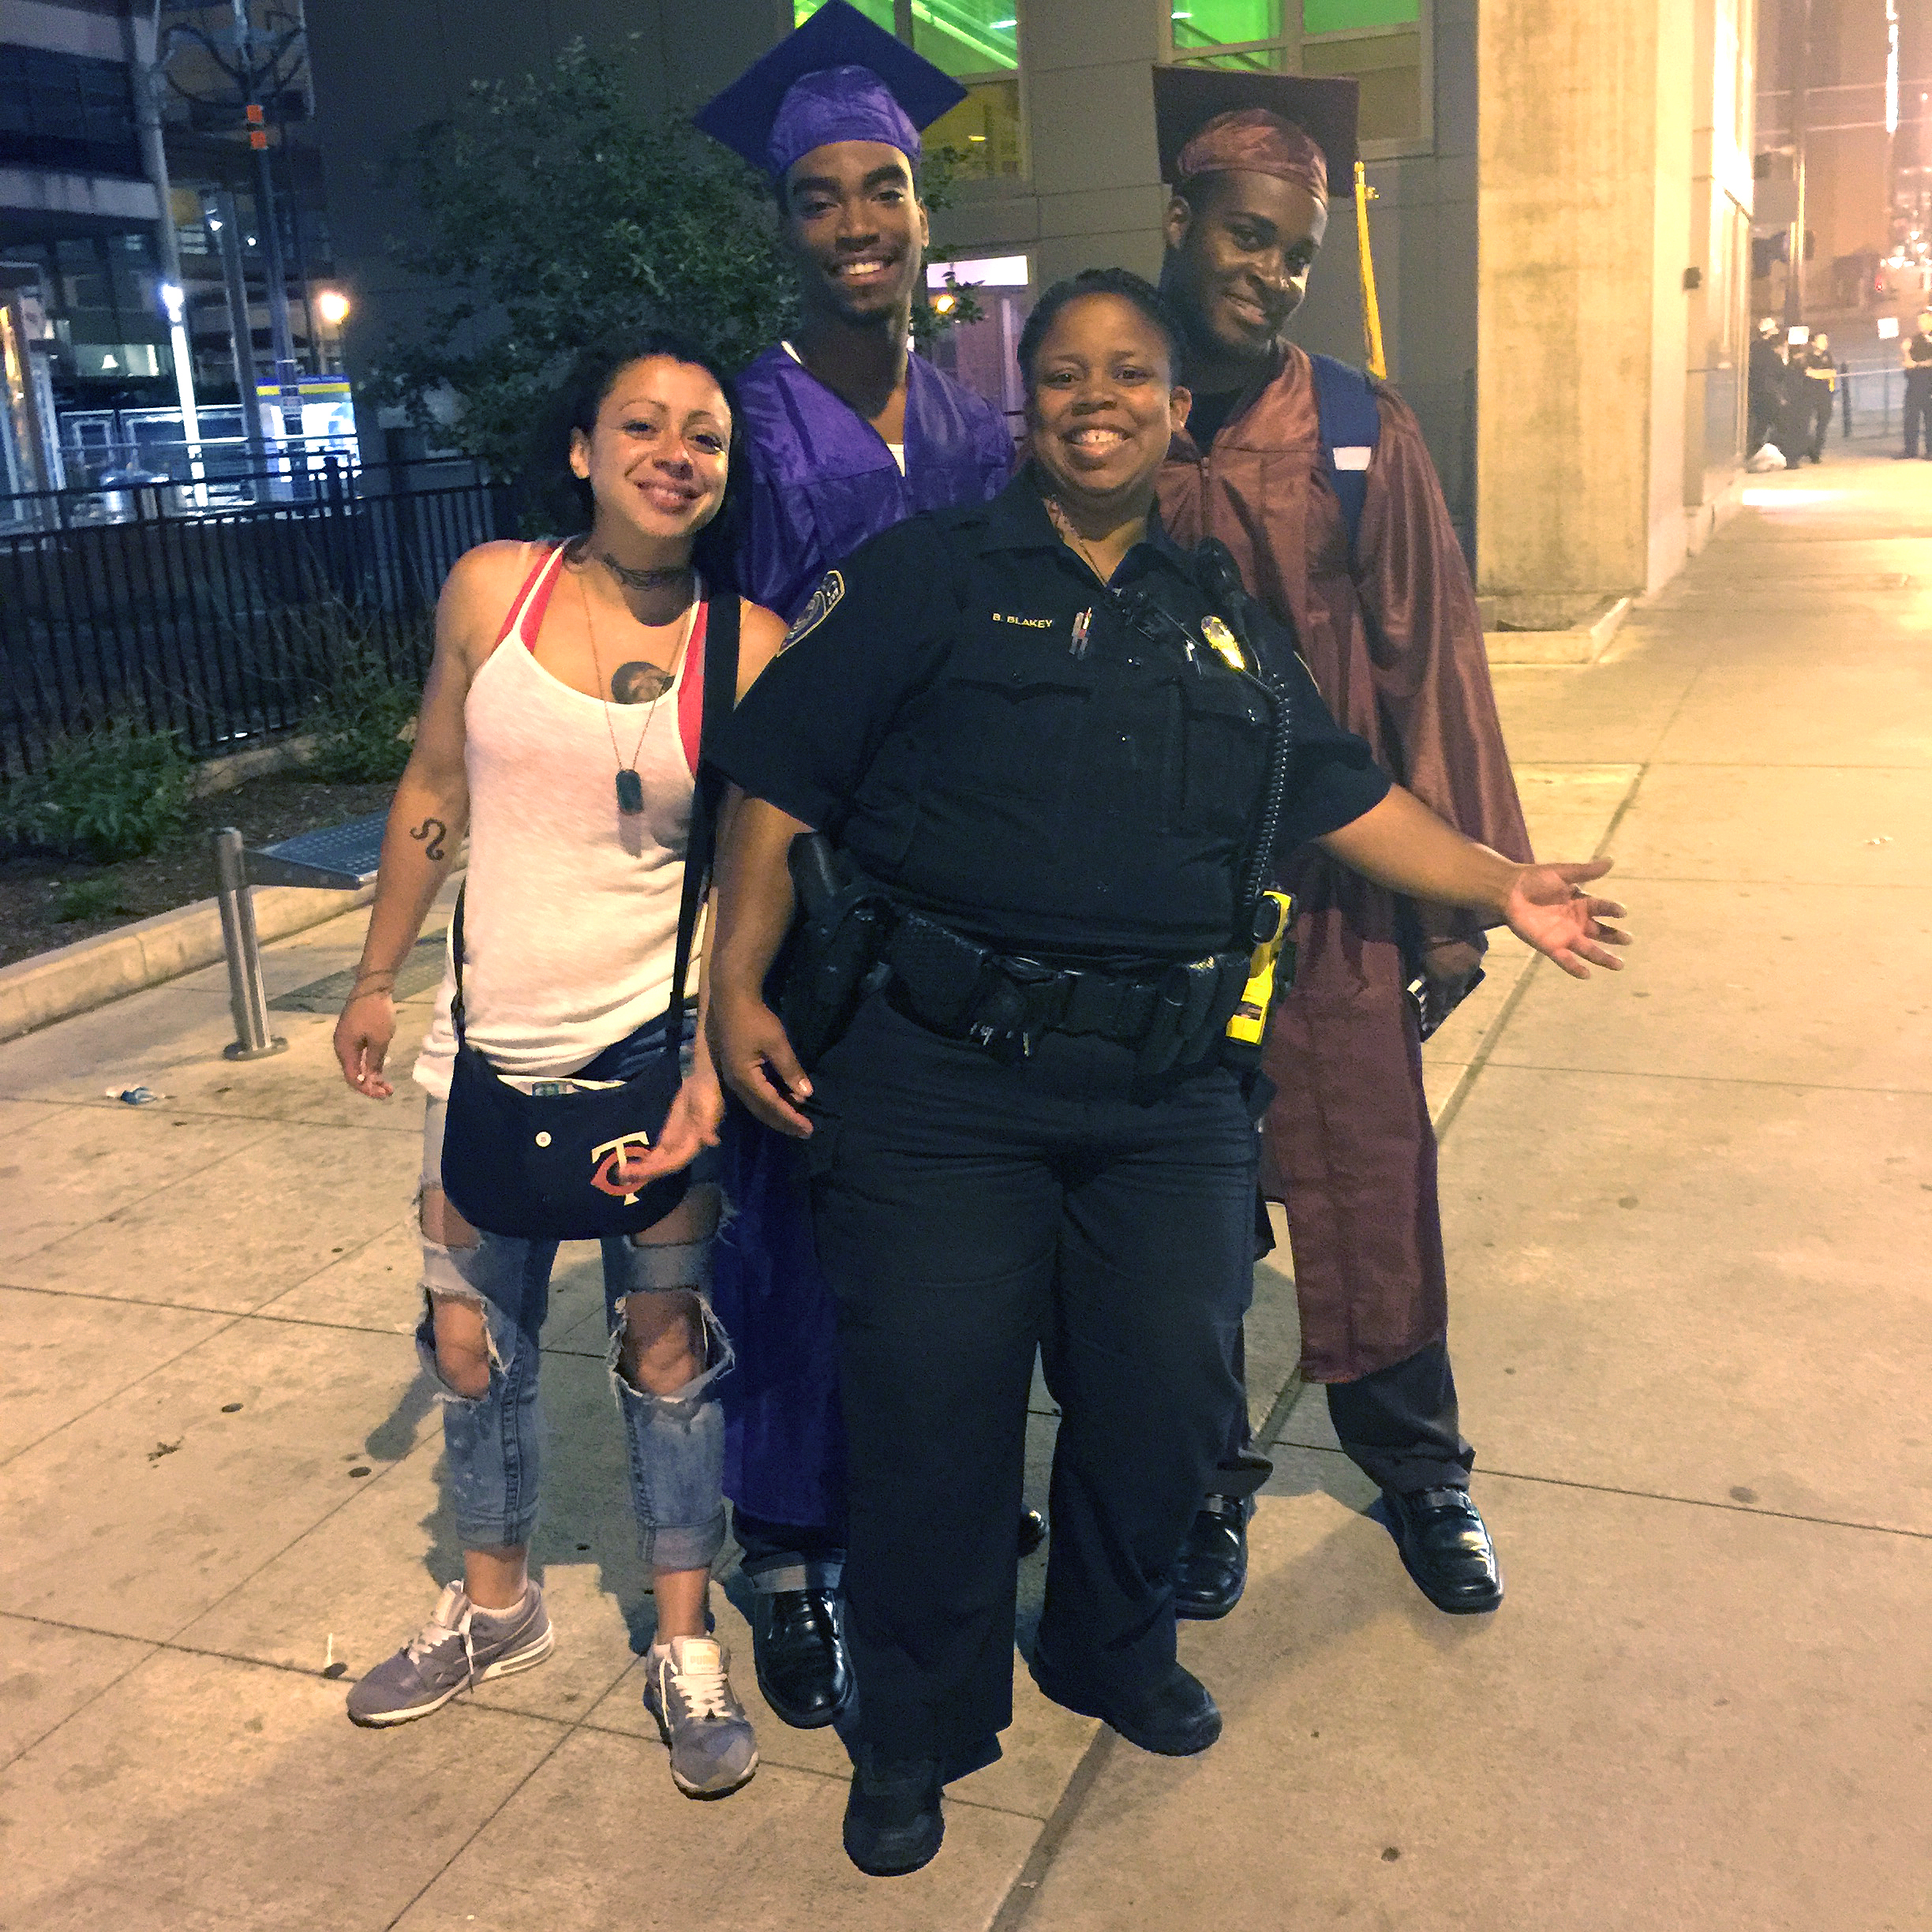 Metro Transit officer Brooke Blakey with participants in the department's Youth Diversion Program.